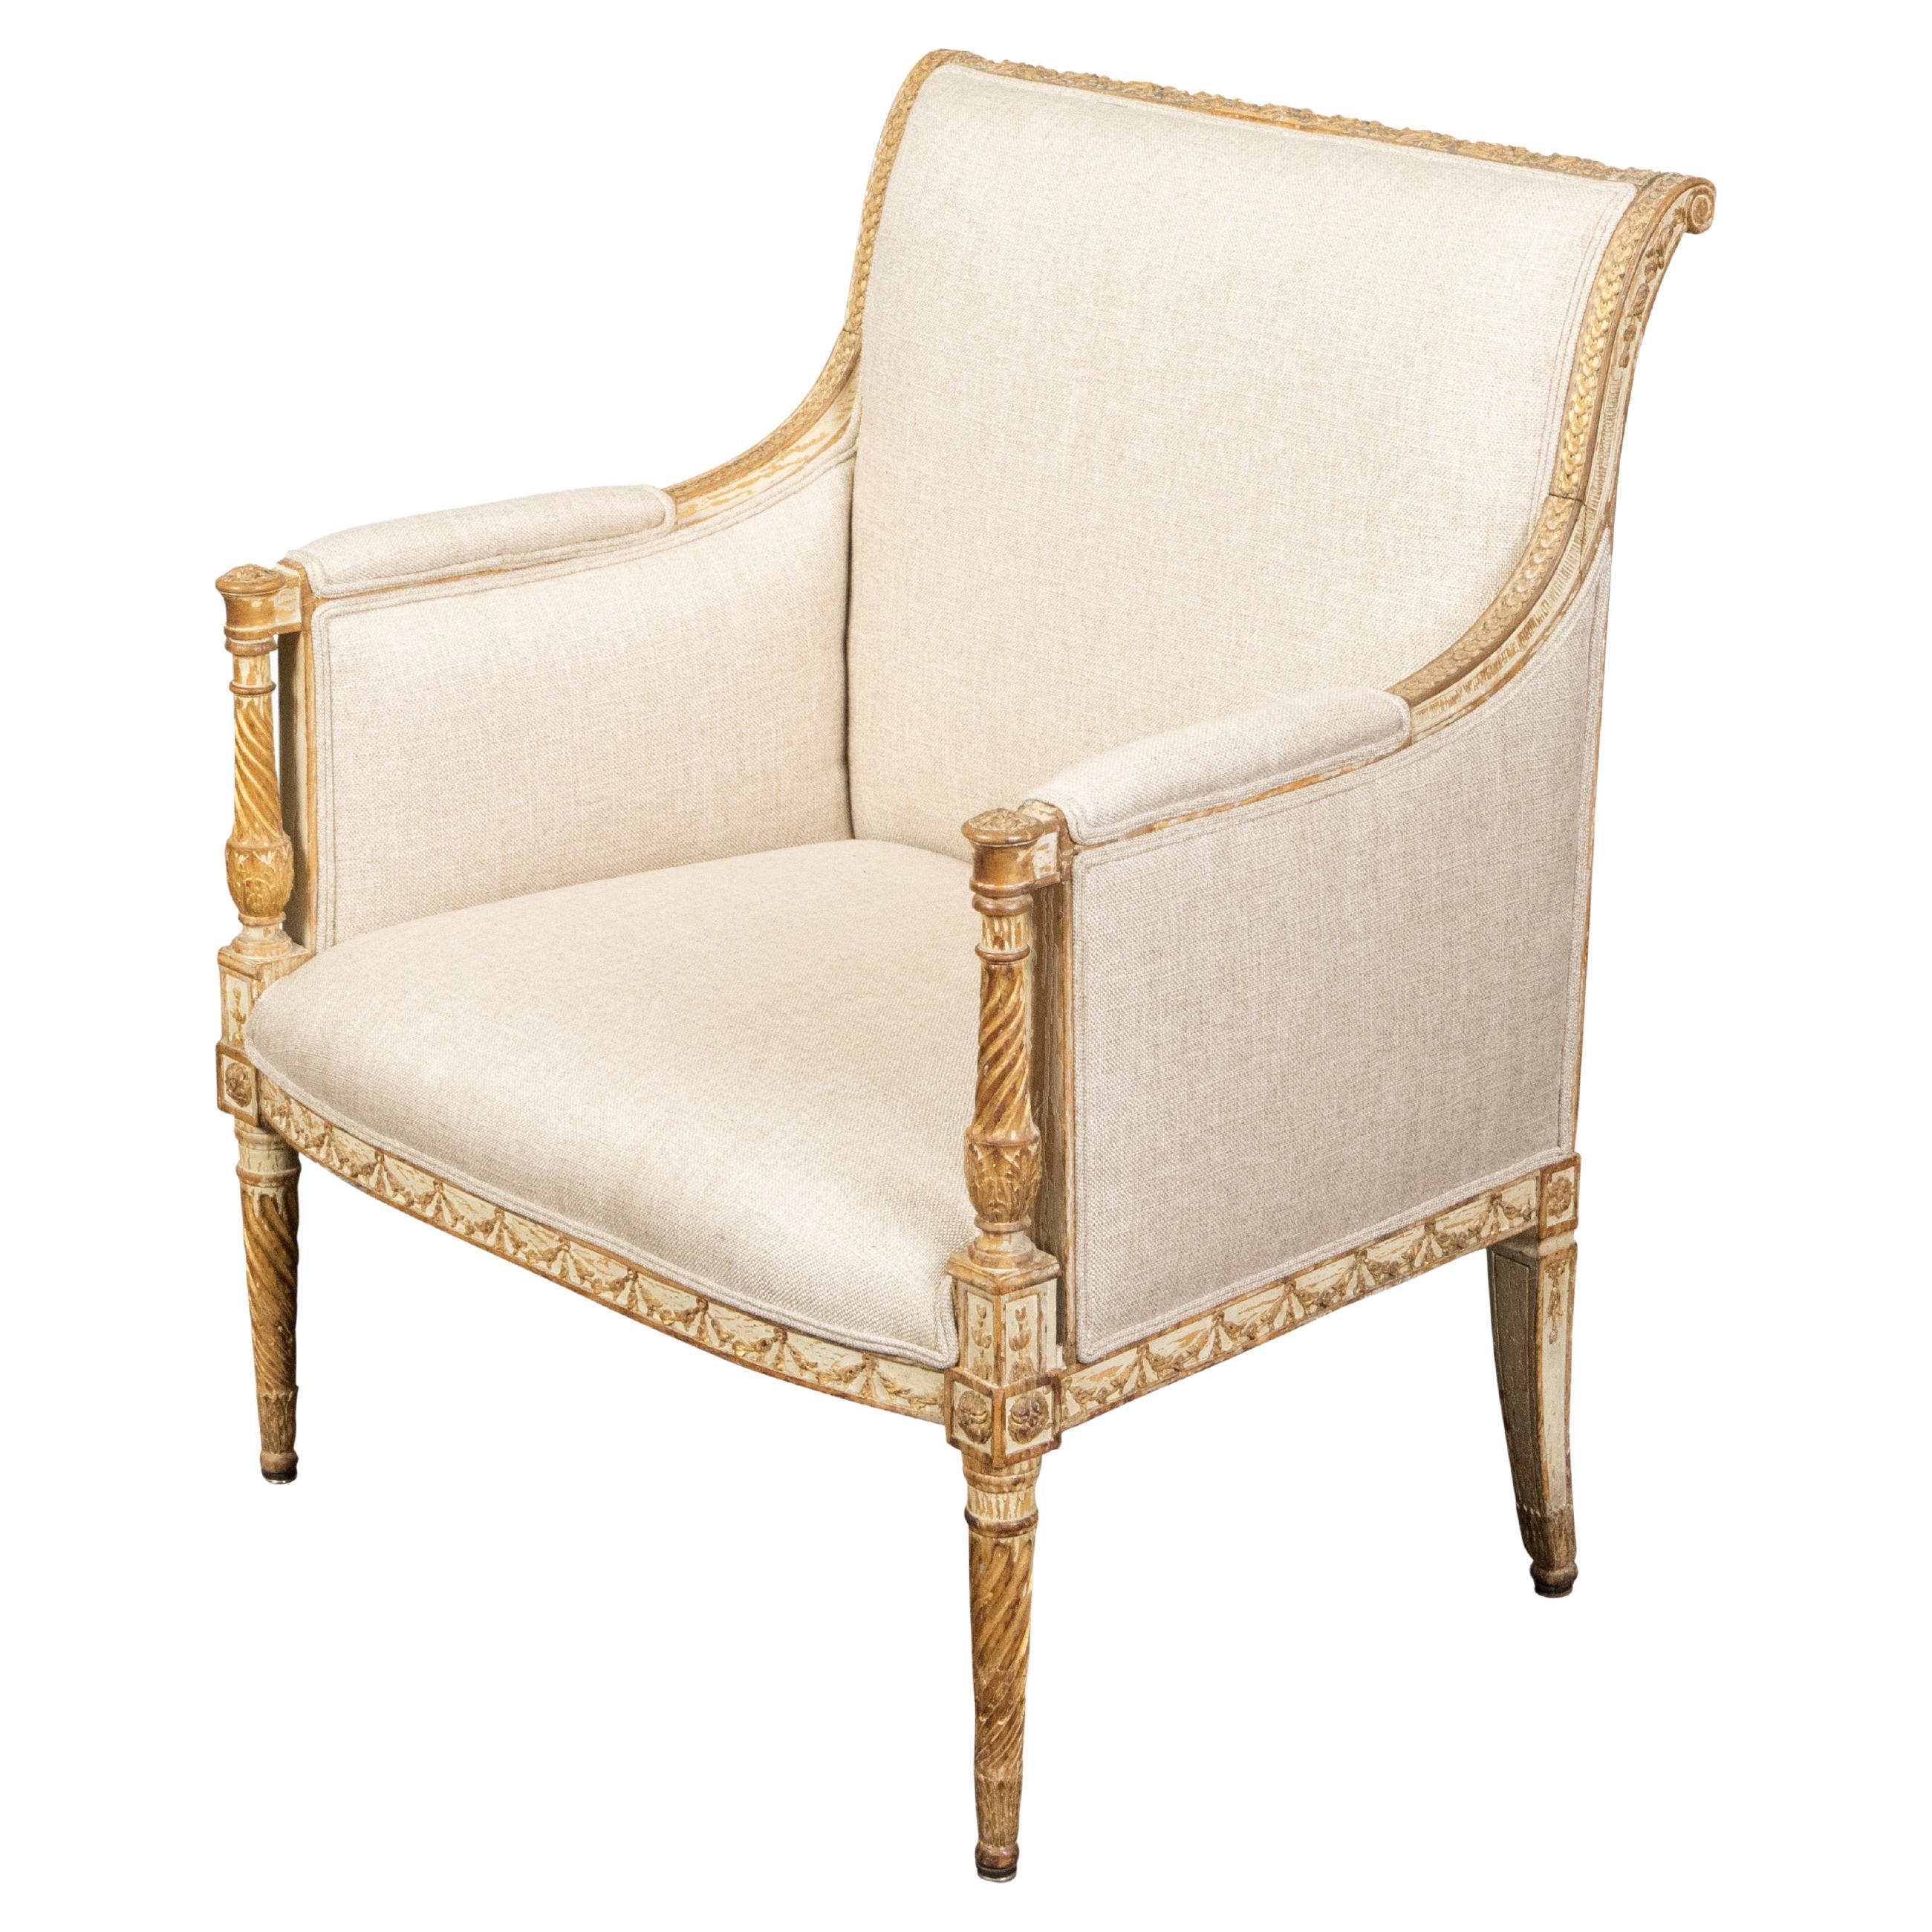 French Directoire Style 19th Century Carved, Painted and Gilded Bergère Chair